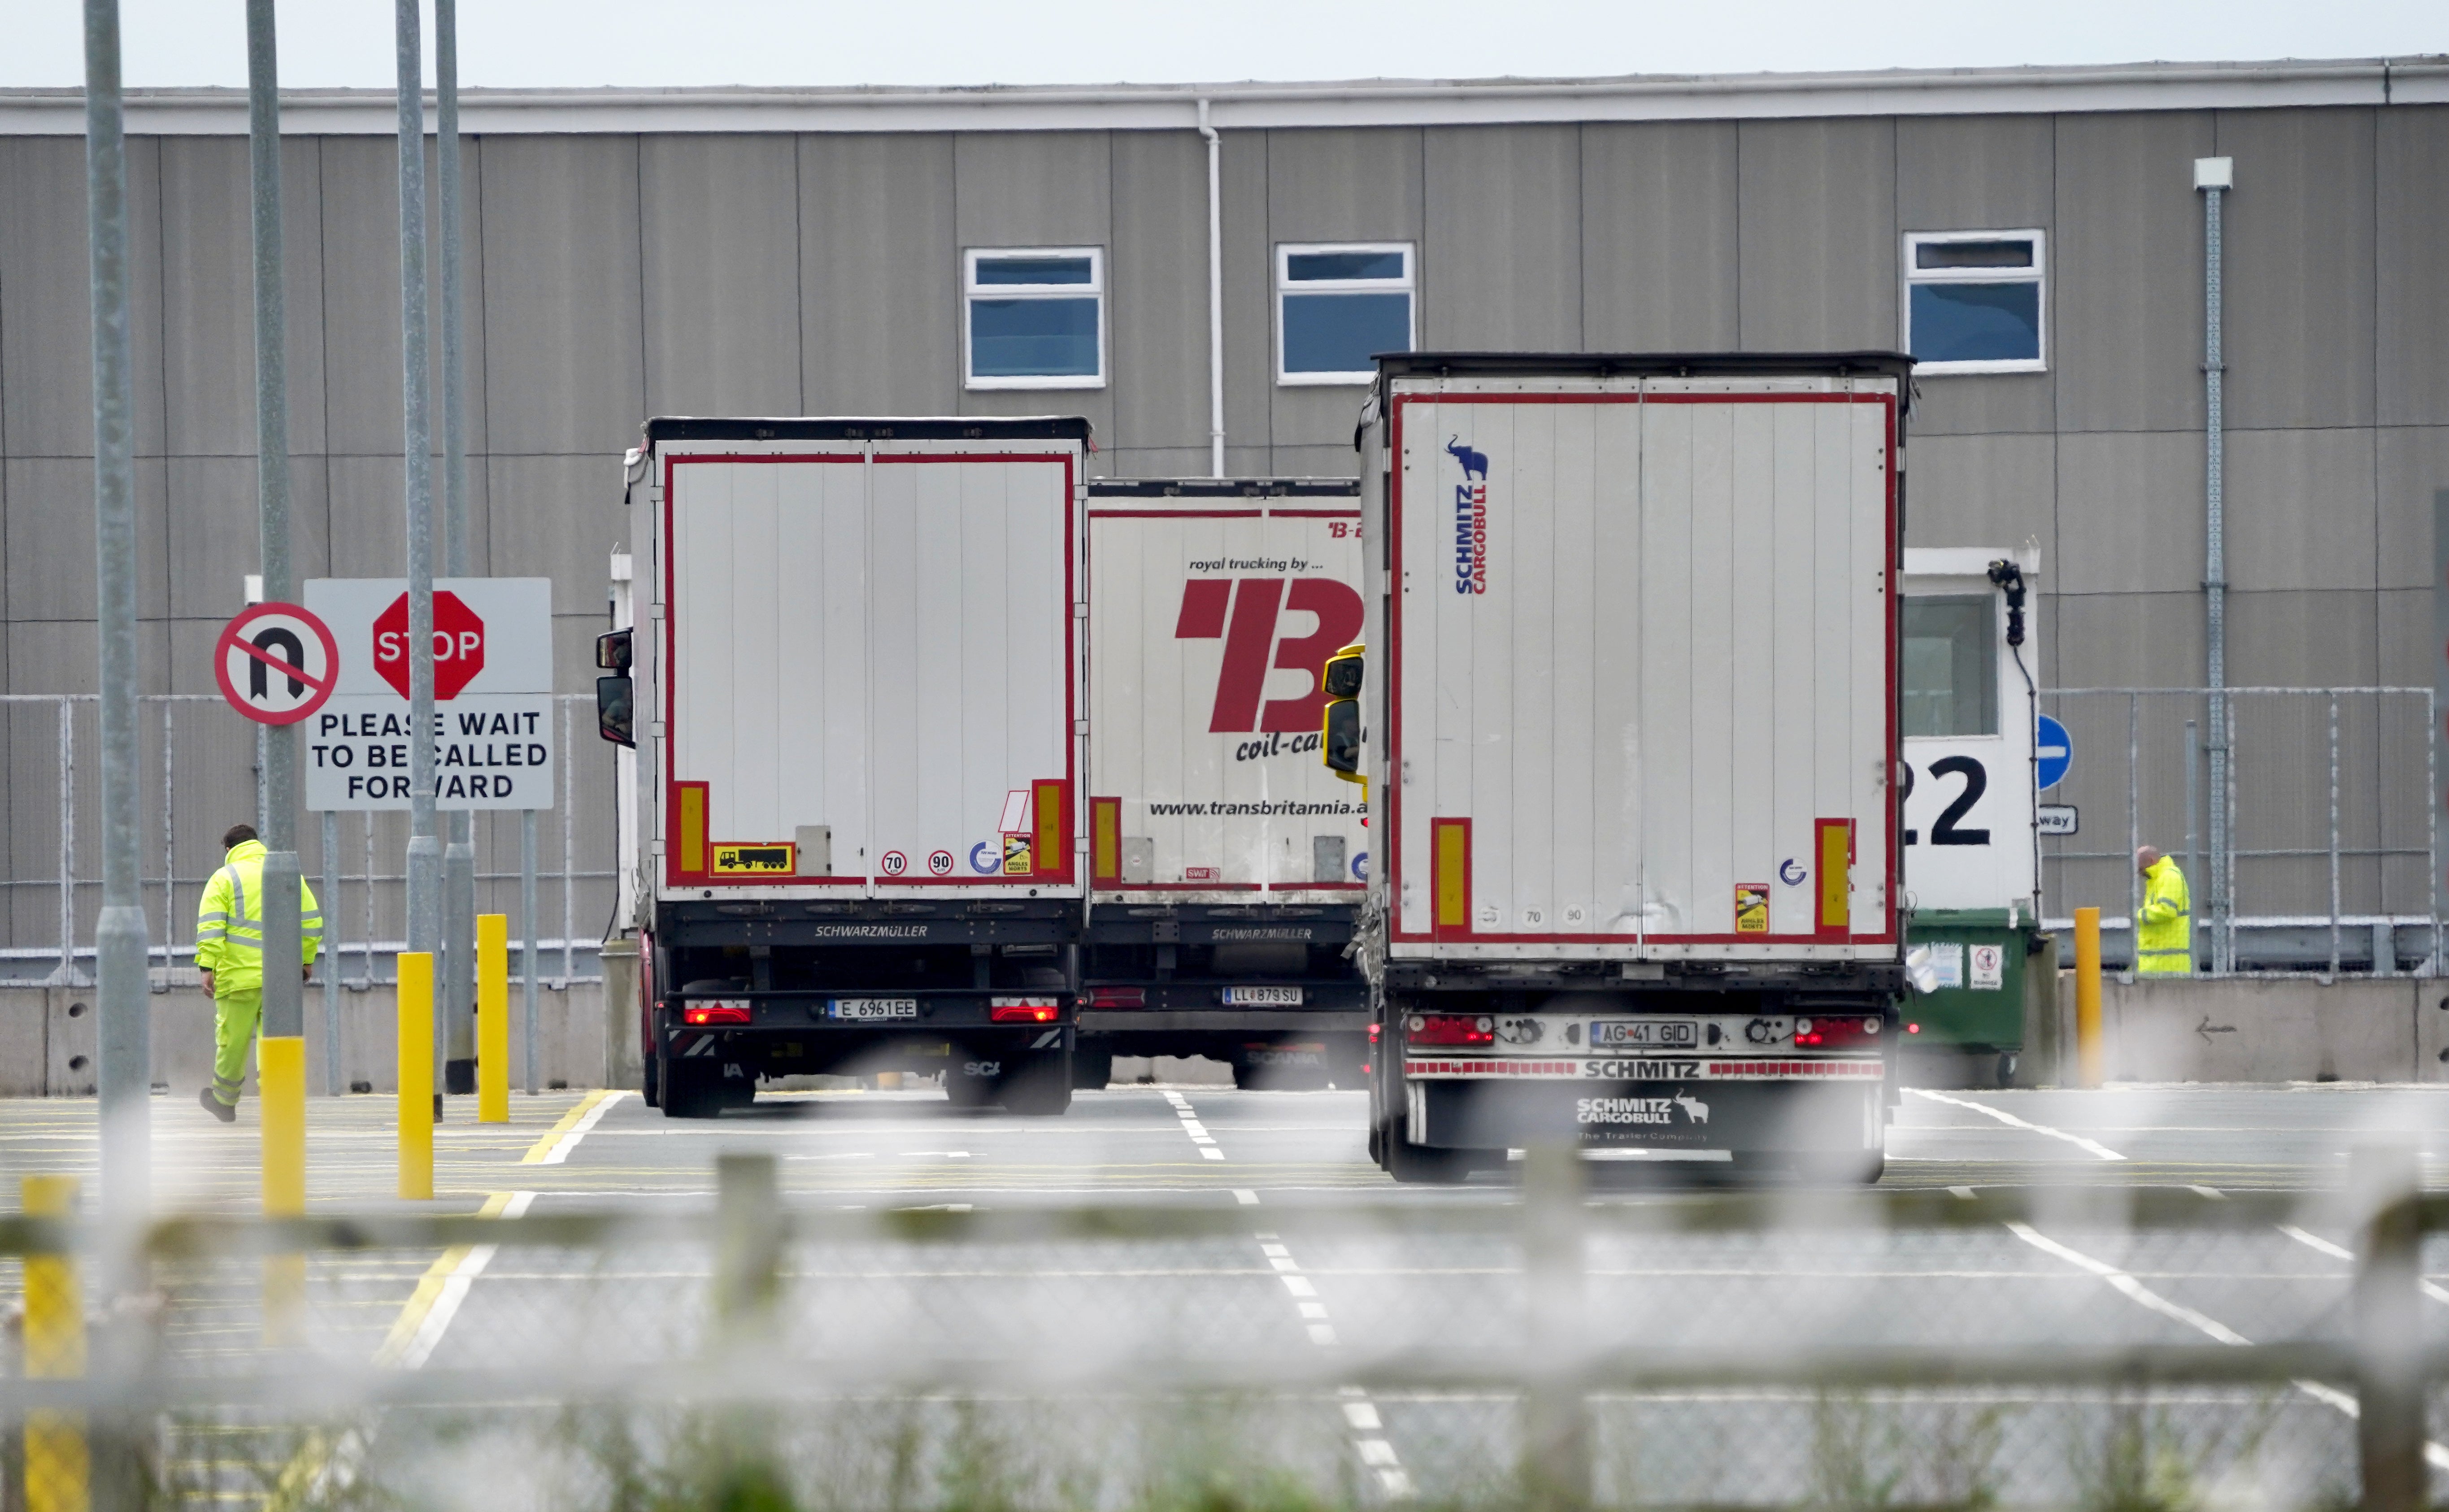 Lorries at the Sevington Inland Border Facility in Ashford as the National Audit Office warns over uncertainty for a post-Brexit border controls system